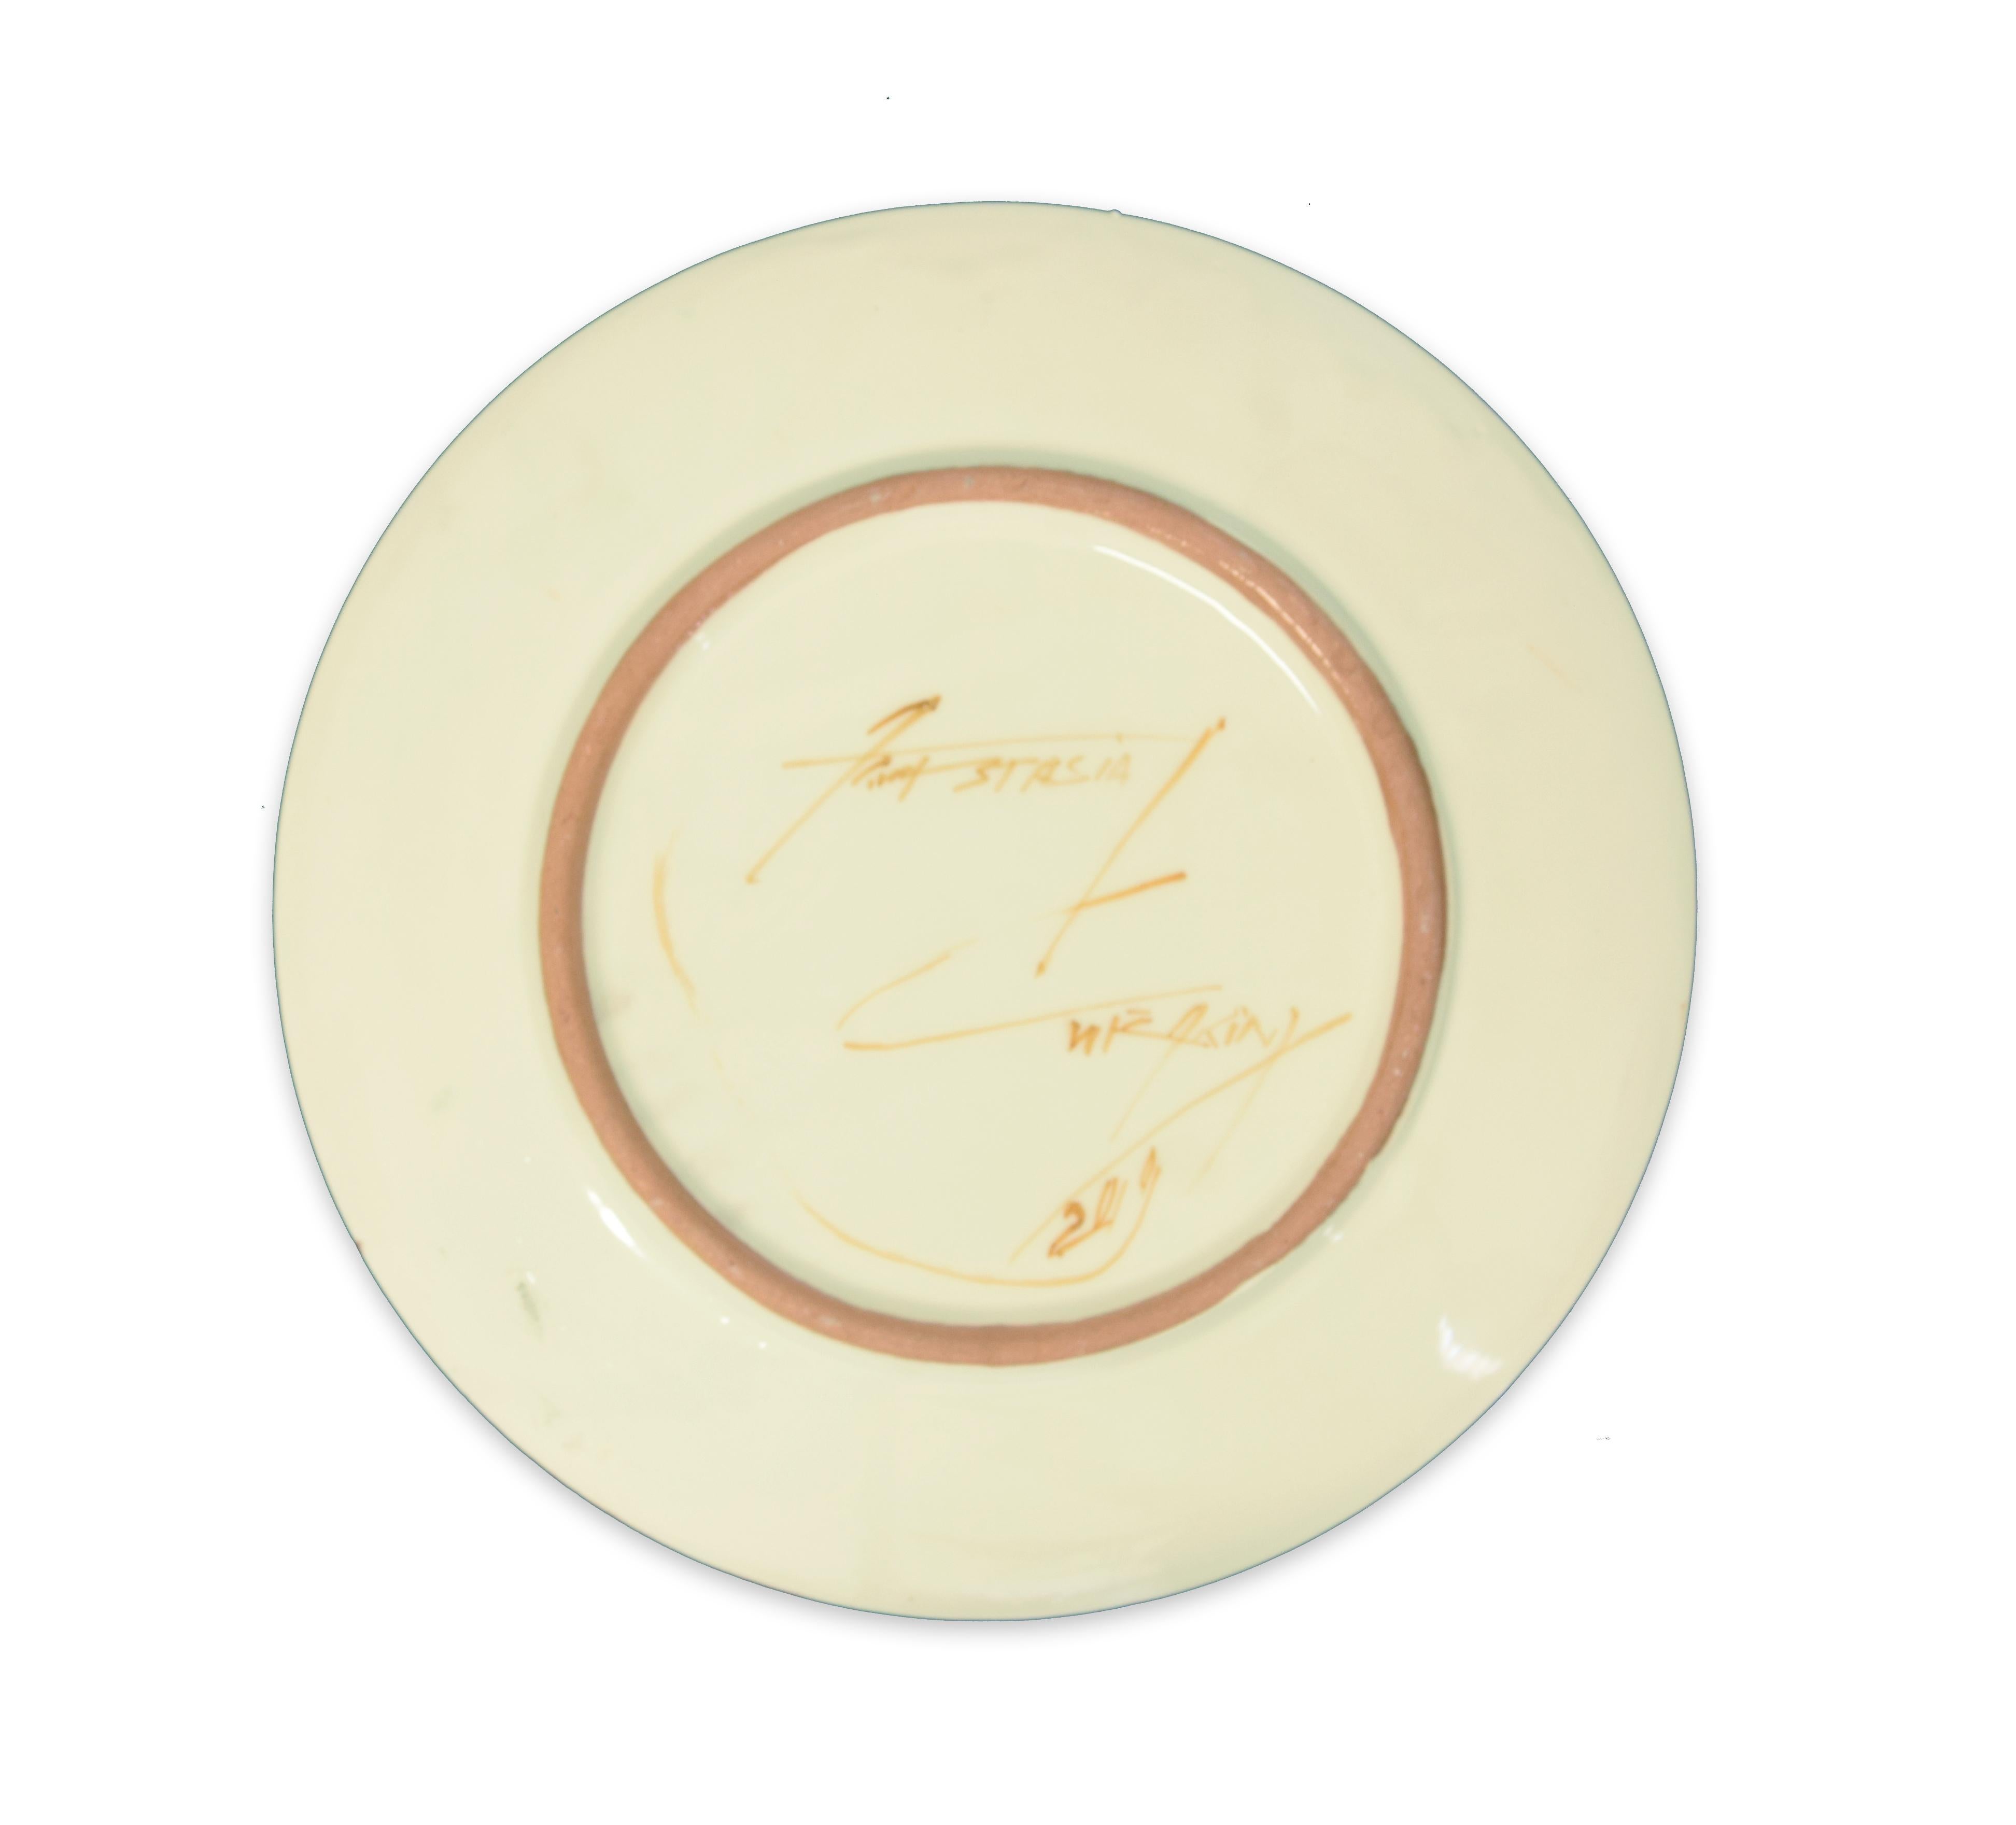 Golden Ringlets is a hand-made ceramic flat dish, hand-painted and realized by the artist, Anastasia Kurakina in 2019. 

Signed and dated on the back at the center.

This is a wonderful artist's dish of ceramic representing an interesting female